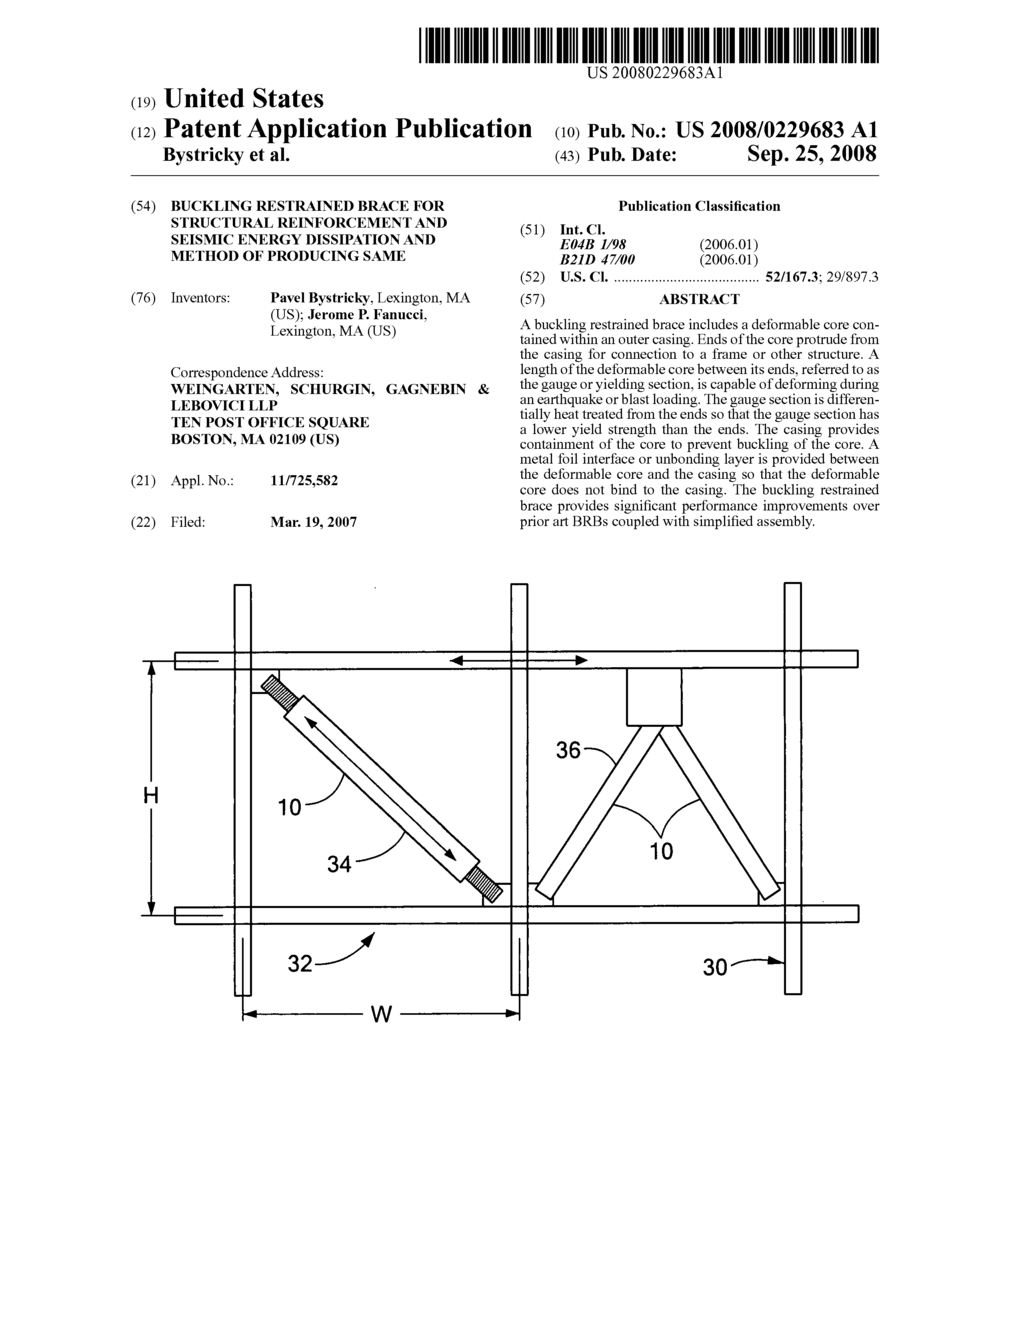 Buckling restrained brace for structural reinforcement and seismic energy dissipation and method of producing same - diagram, schematic, and image 01